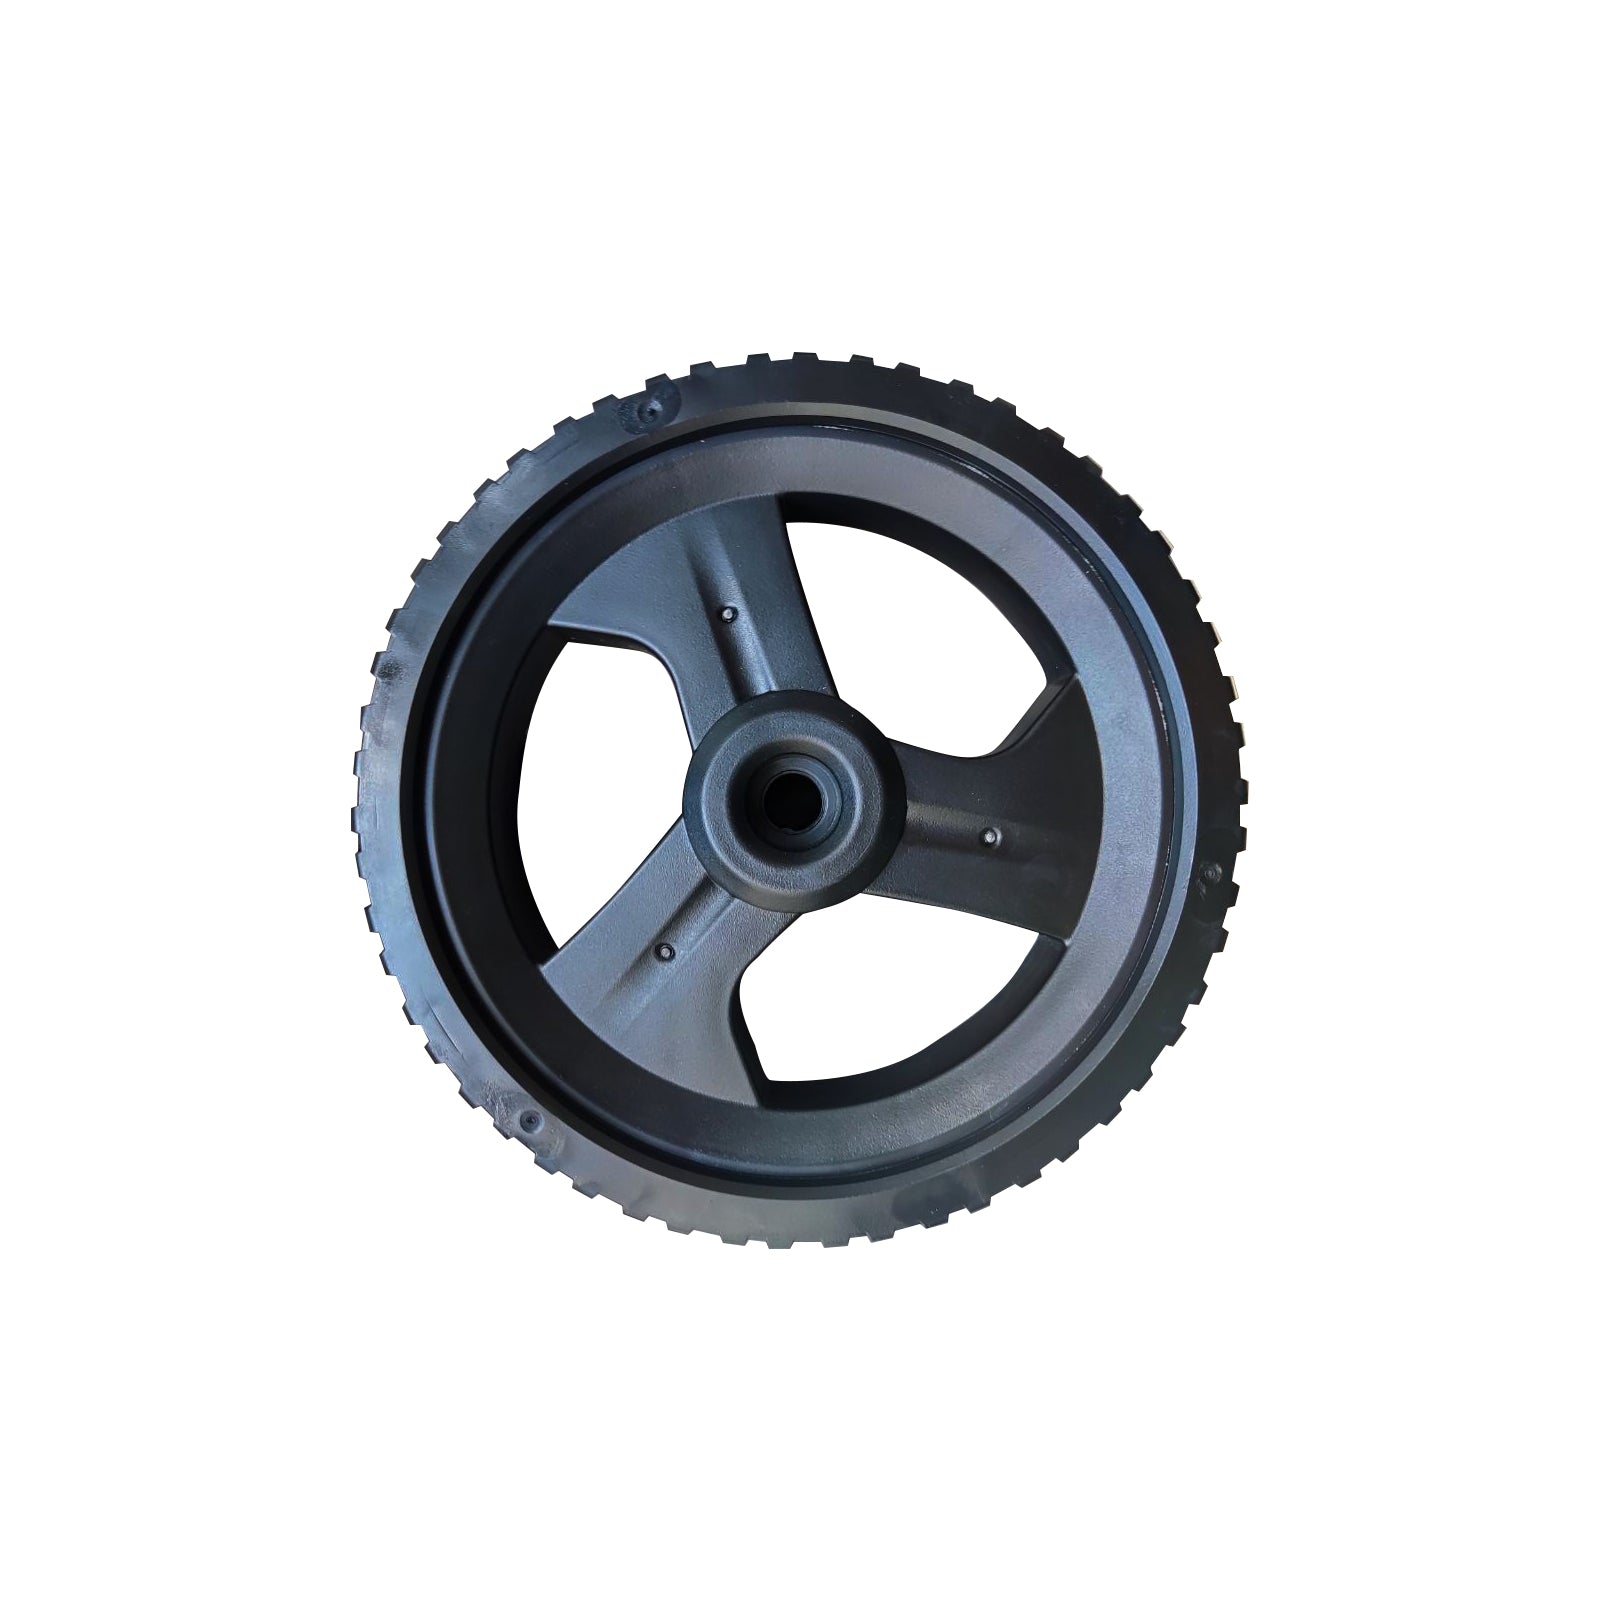 Lawn Mower Parts - 7 inch Right wheel, Stock #: 203050648